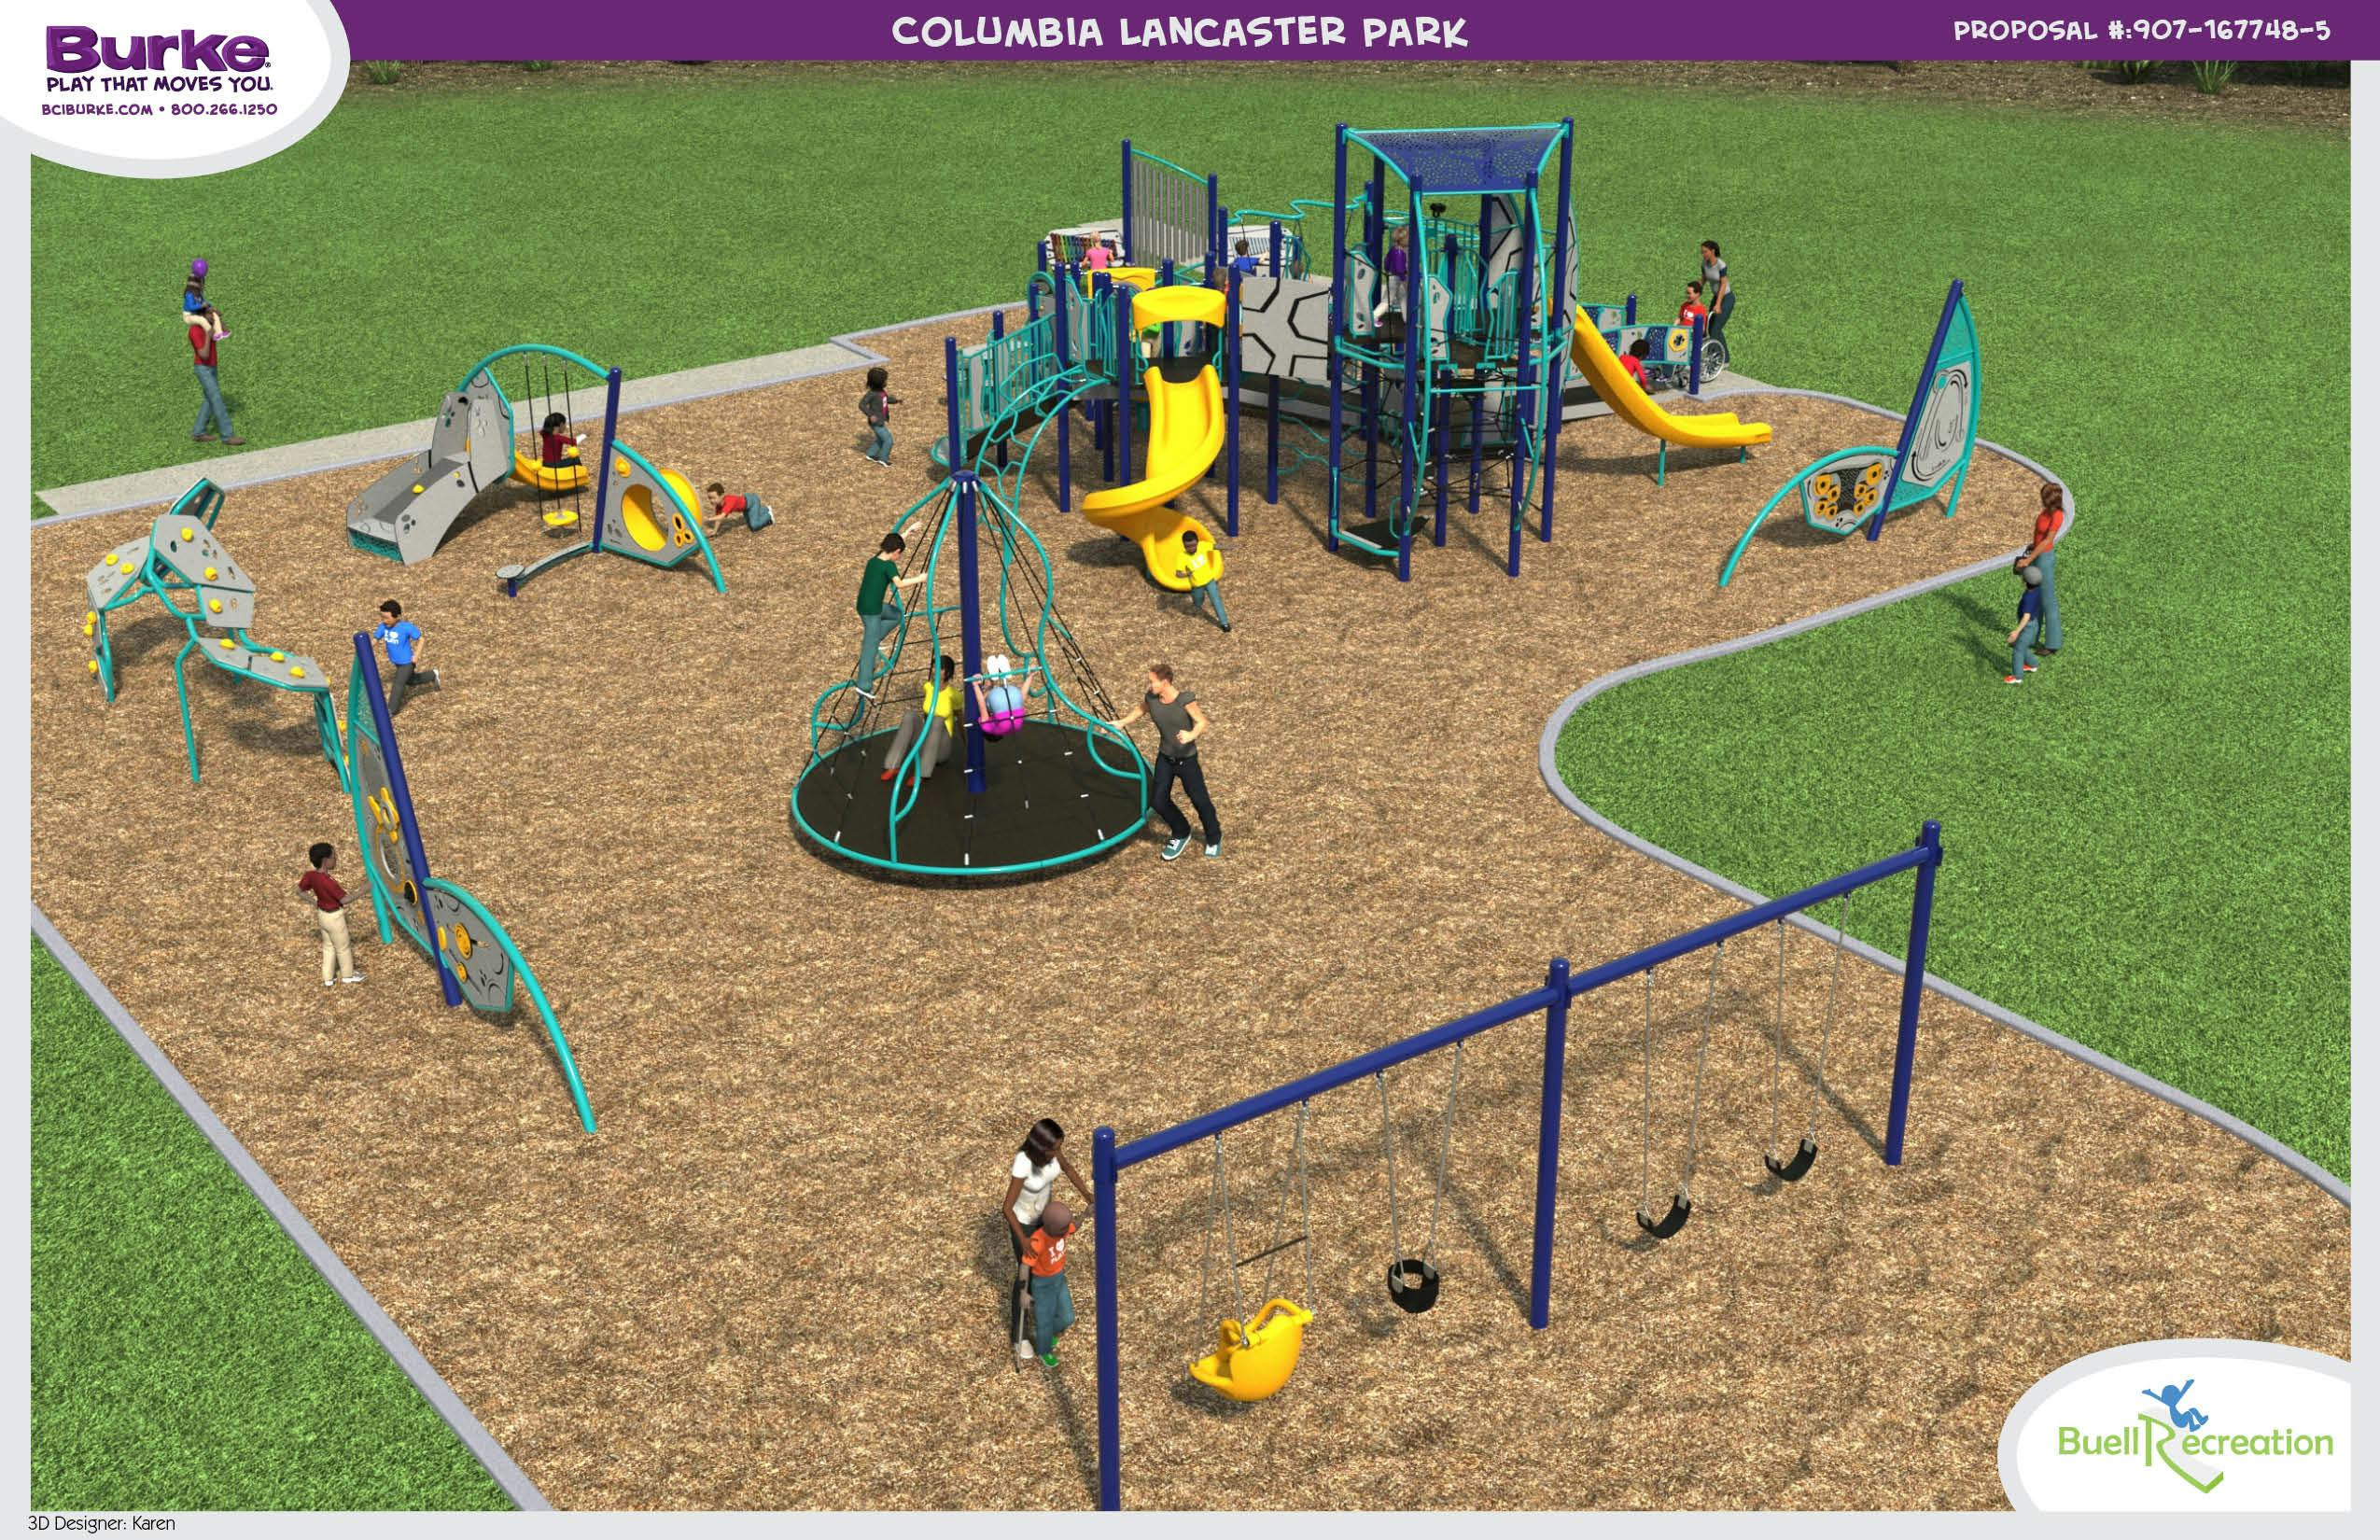 Alternate view of the new Columbia Lancaster playground rendering